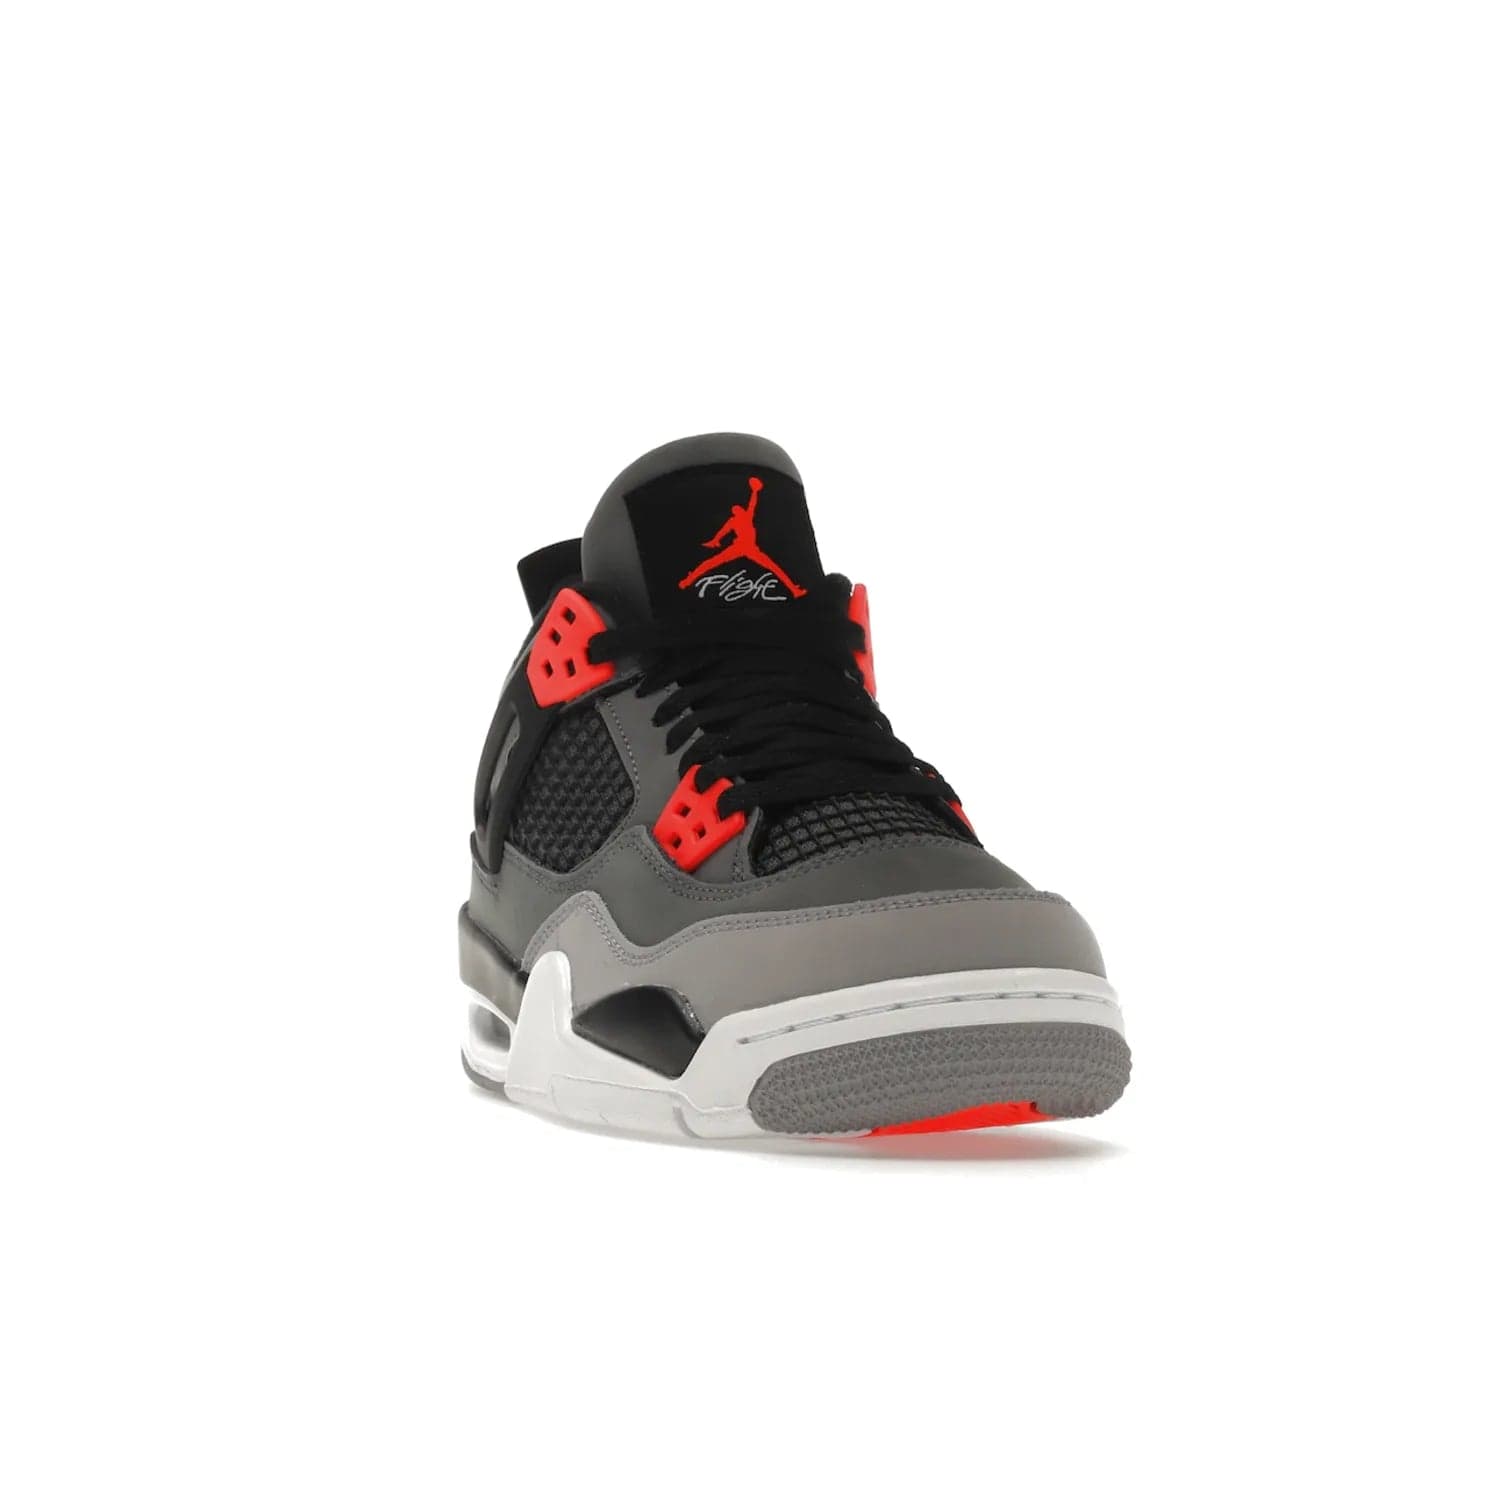 Jordan 4 Retro Infrared (GS) - Image 8 - Only at www.BallersClubKickz.com - Shop the Air Jordan 4 Retro Infrared (GS) for a classic silhouette with subtle yet bold features. Dark grey nubuck upper with lighter forefoot overlay, black accents, Infrared molded eyelets & woven tongue tag. Available June 2022.